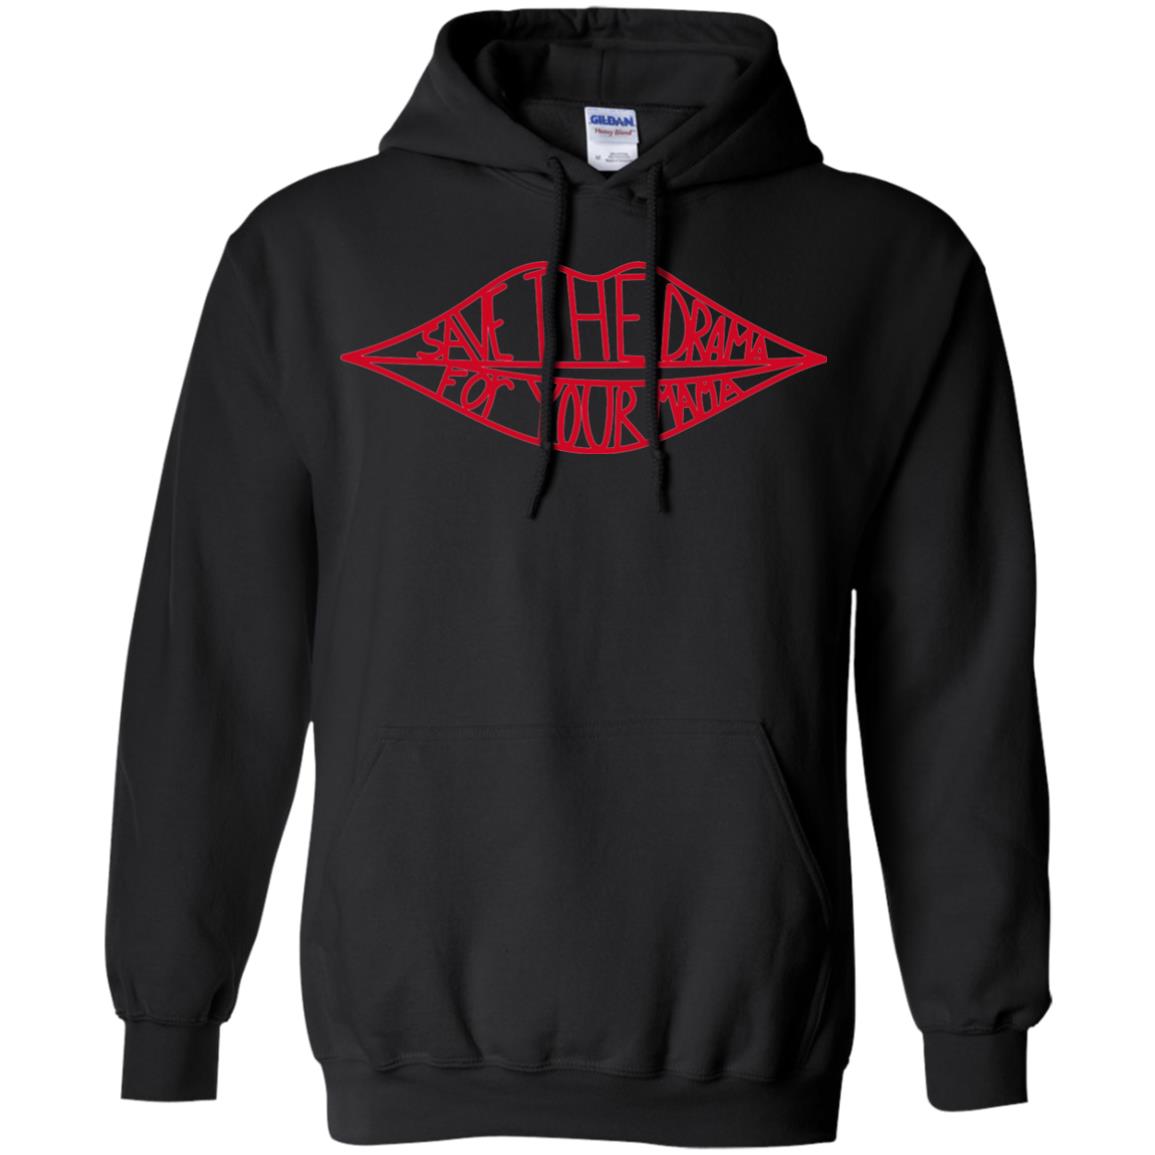 save the drama for your mama hoodie - black